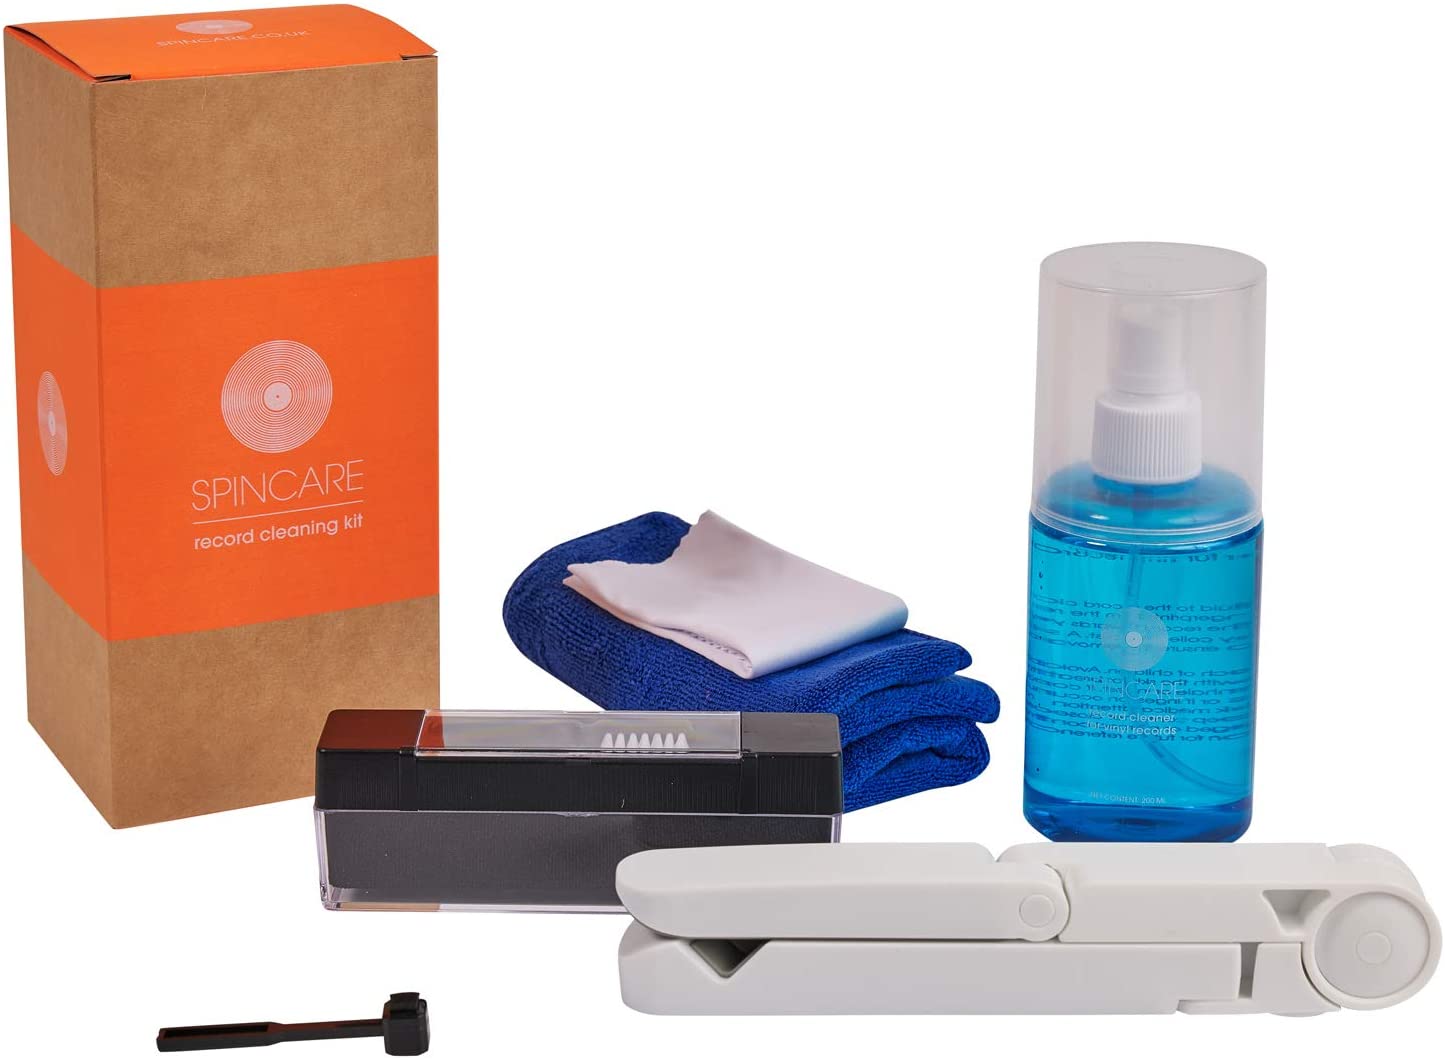 Spincare Record Cleaning Kit